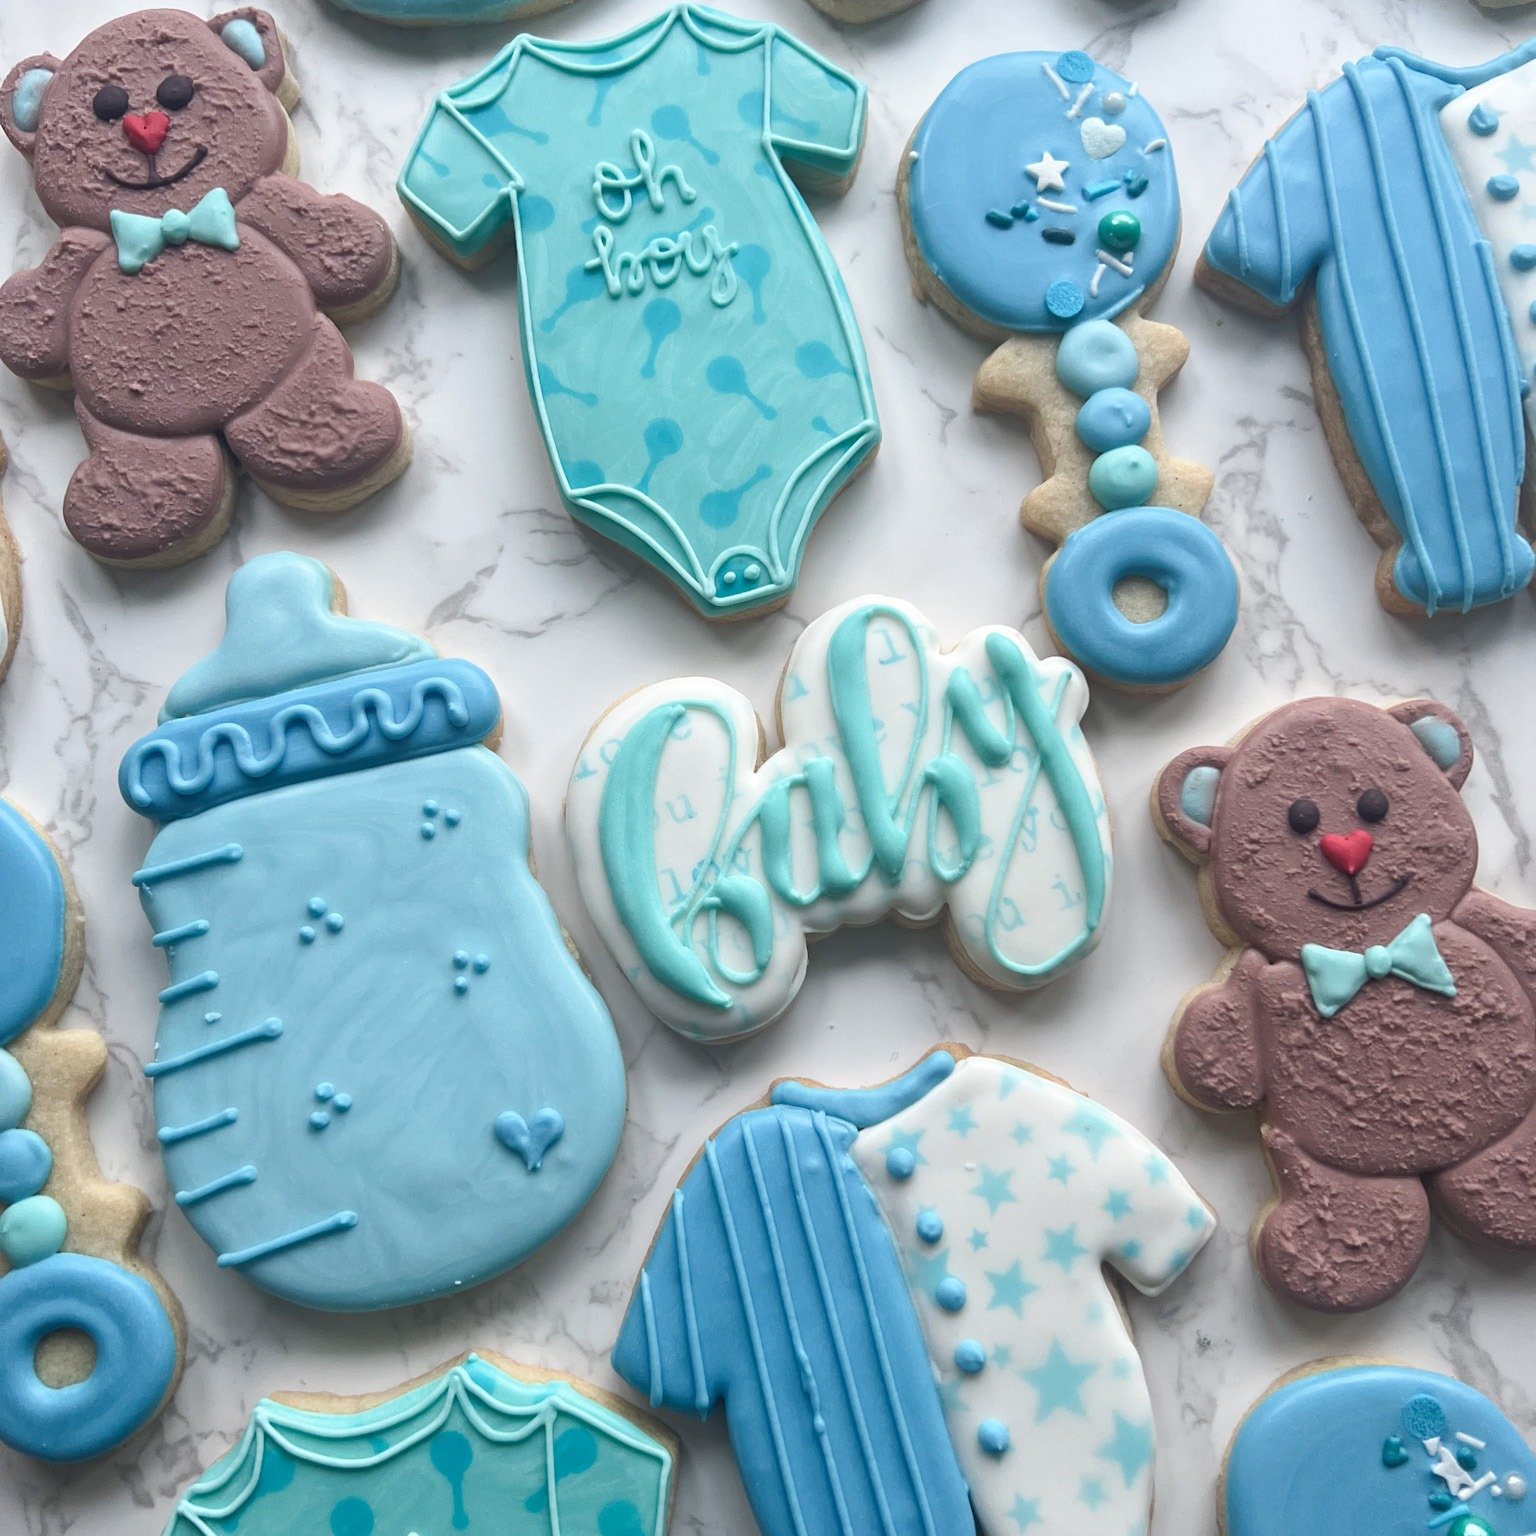 🧸 Oh baby (boy)! 🧸
&bull;
🇮🇱 My heart is always with the people of Israel 🇮🇱 #amyisraelchai #stopjewhate #bringthemhome
&bull;
#Sweetsbymichelle #sweets #desserts #cookies #customcookies #sugarcookies #sugarcookiemarketing #sugarcookiesofinstag